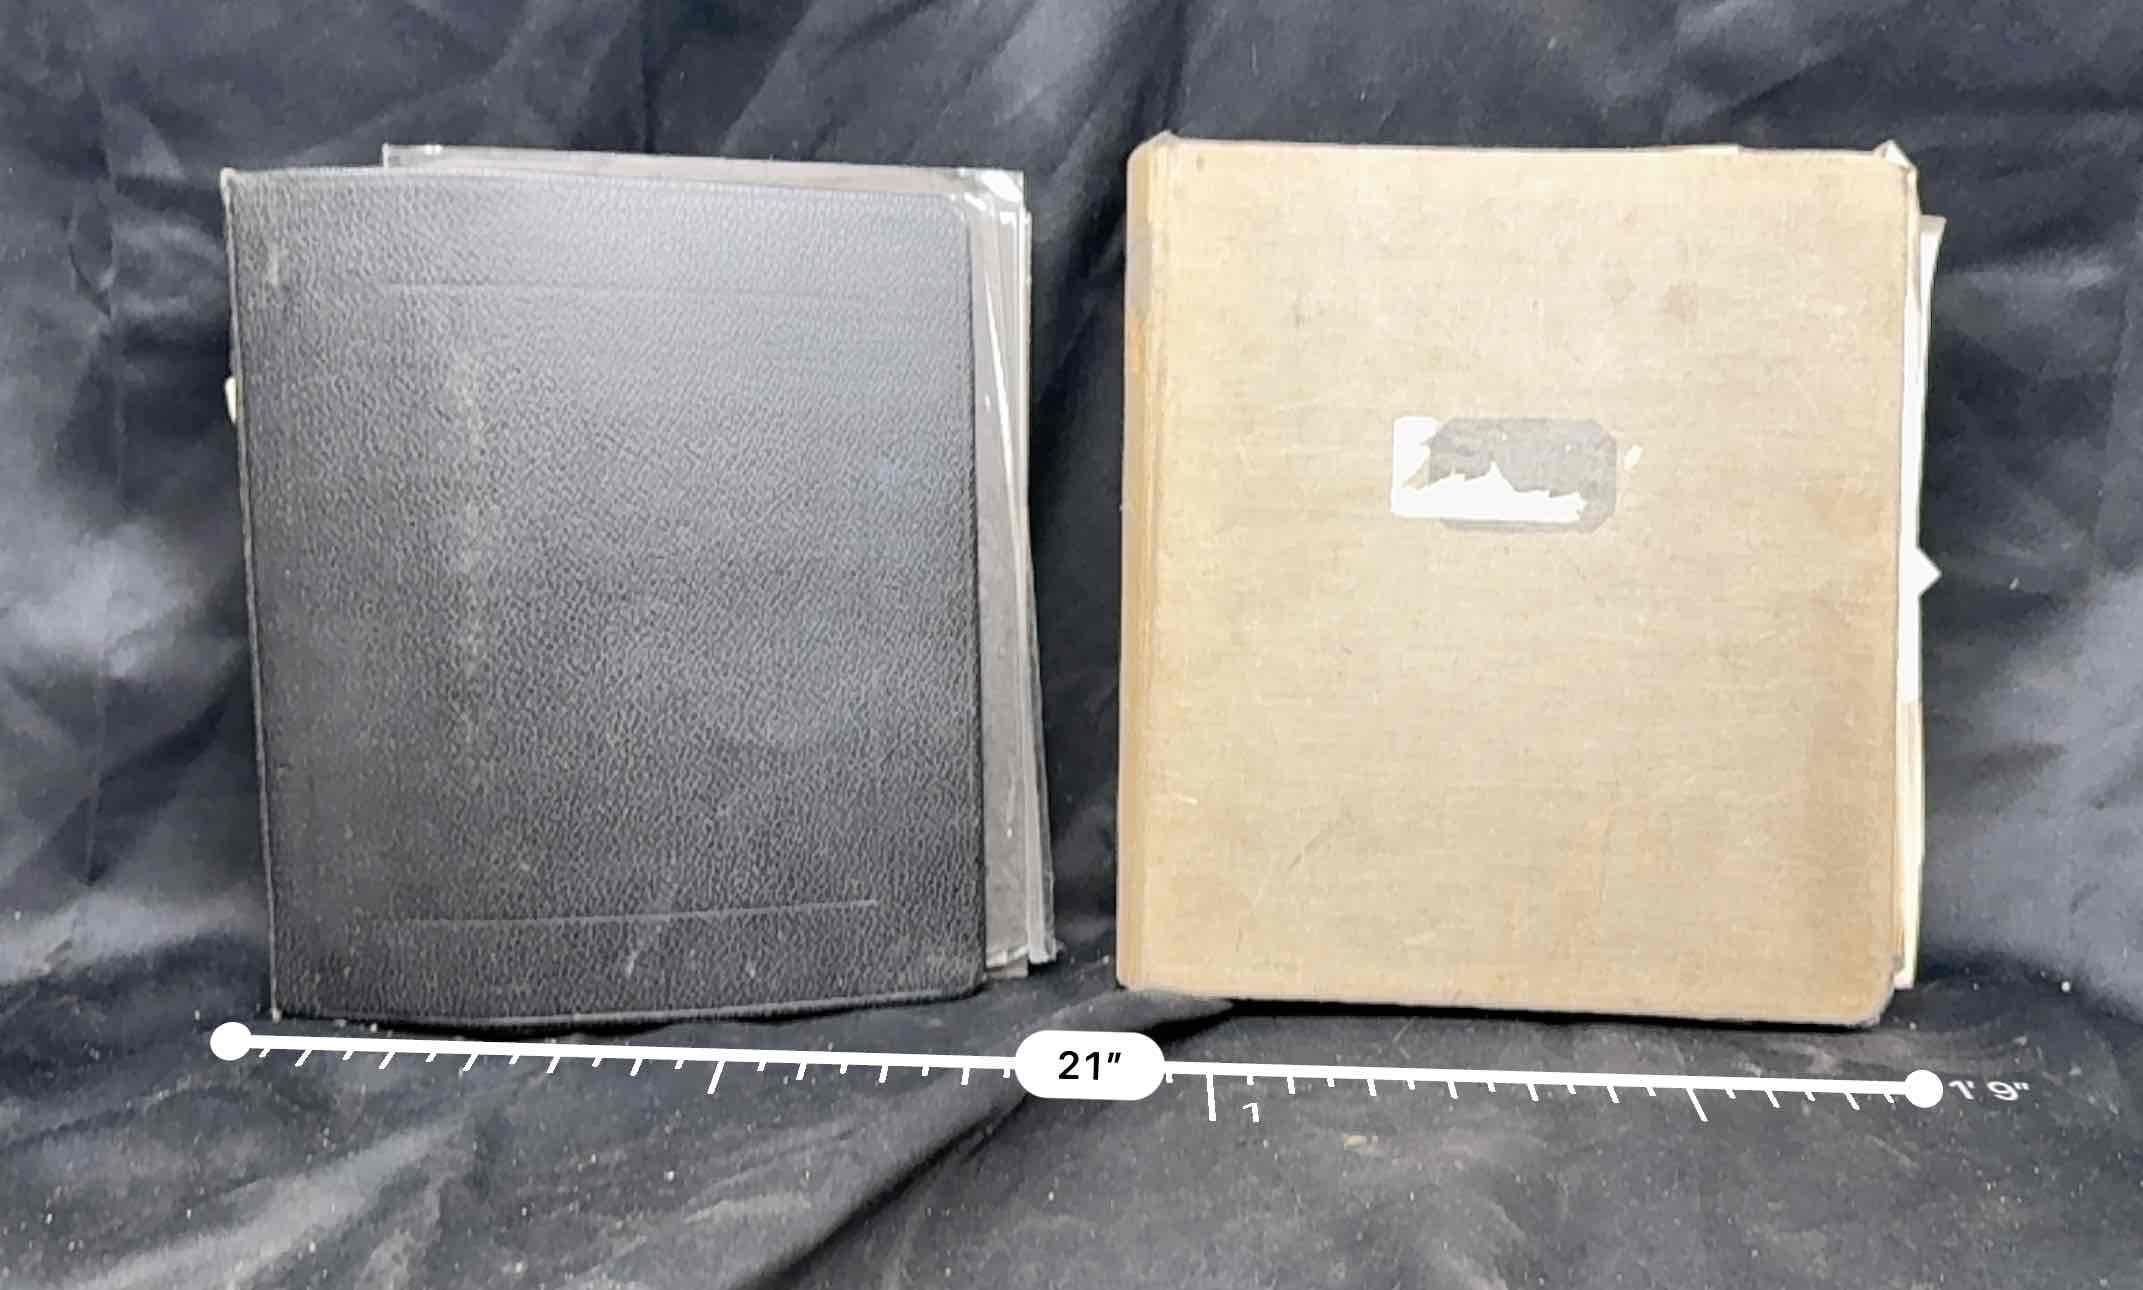 2 Binders Full of poetry and hand drawn sketches